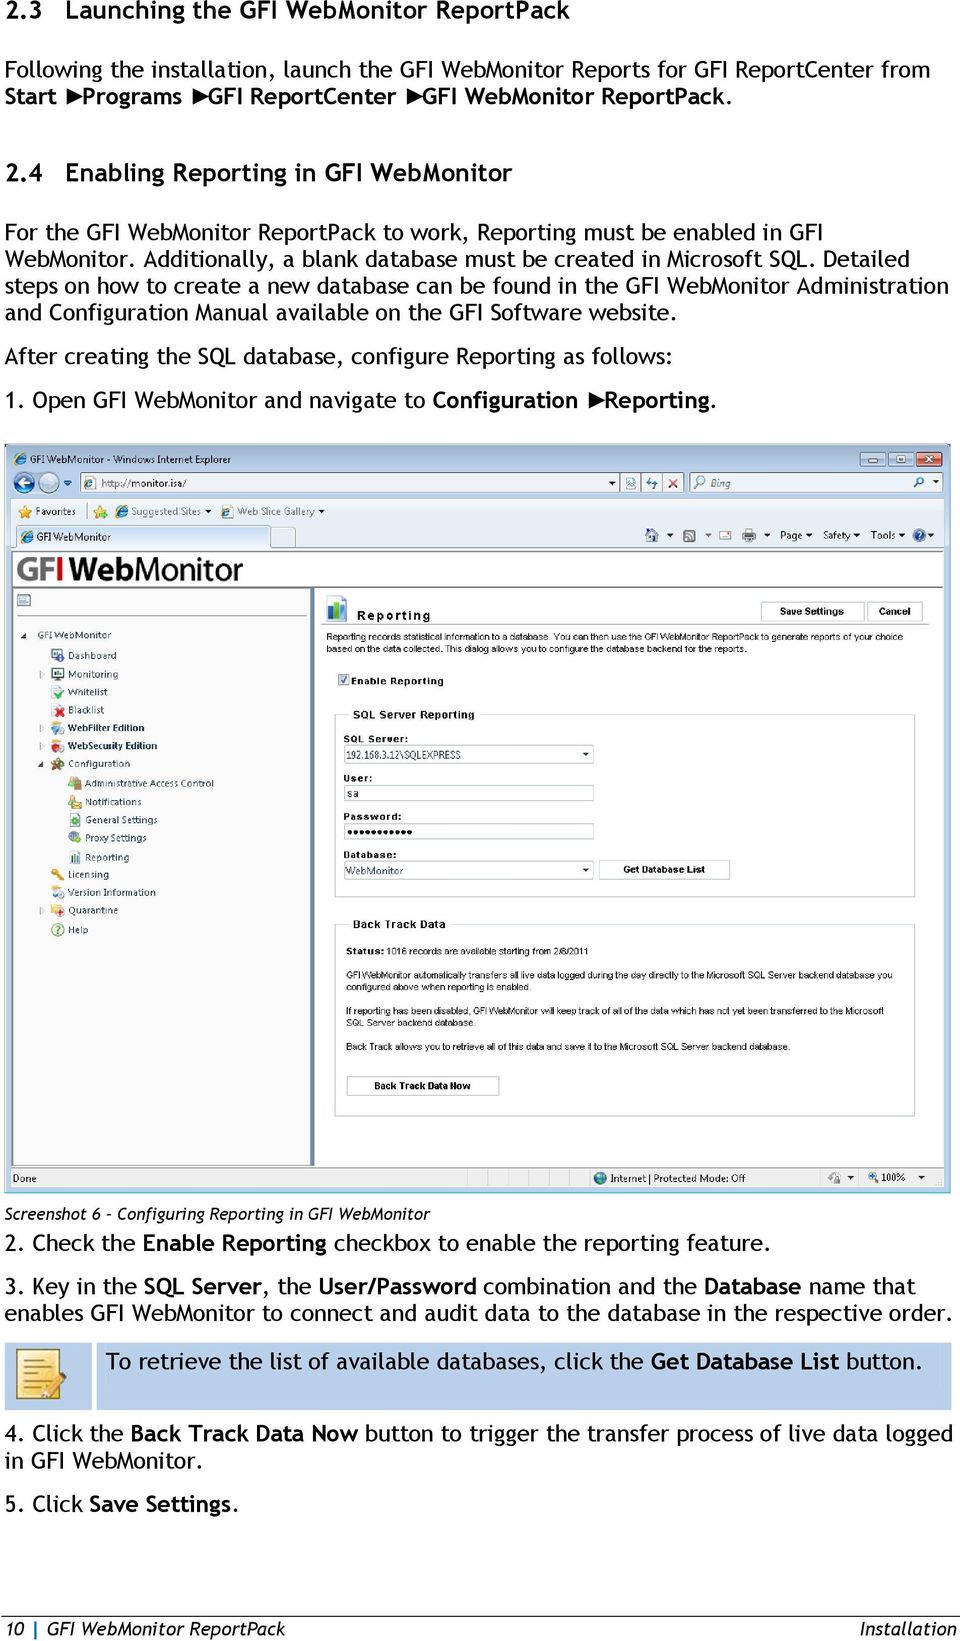 Detailed steps on how to create a new database can be found in the GFI WebMonitor Administration and Configuration Manual available on the GFI Software website.